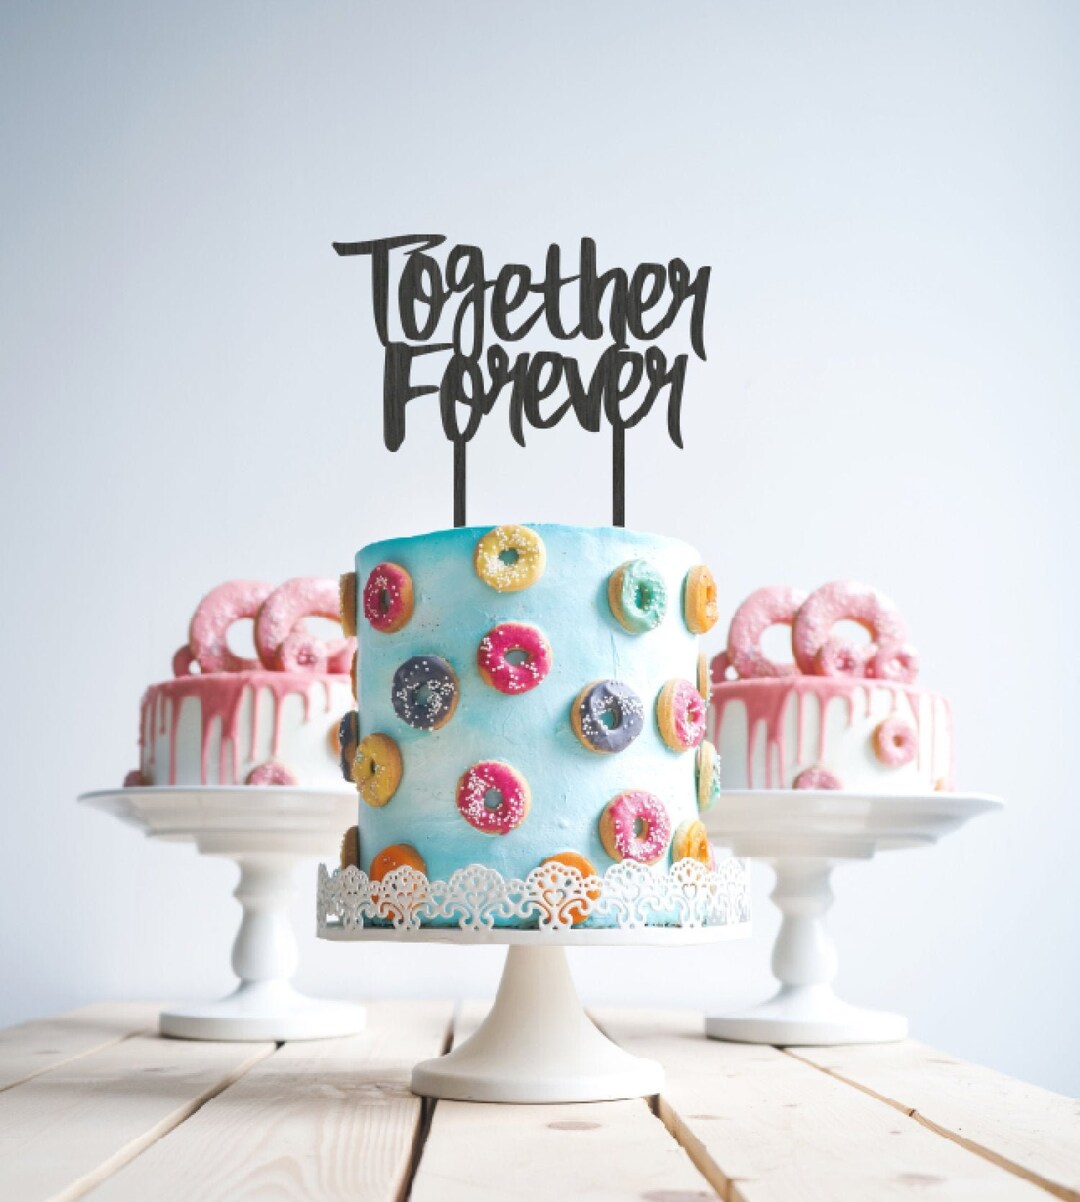 How to make your own Personalized Cake Topper?